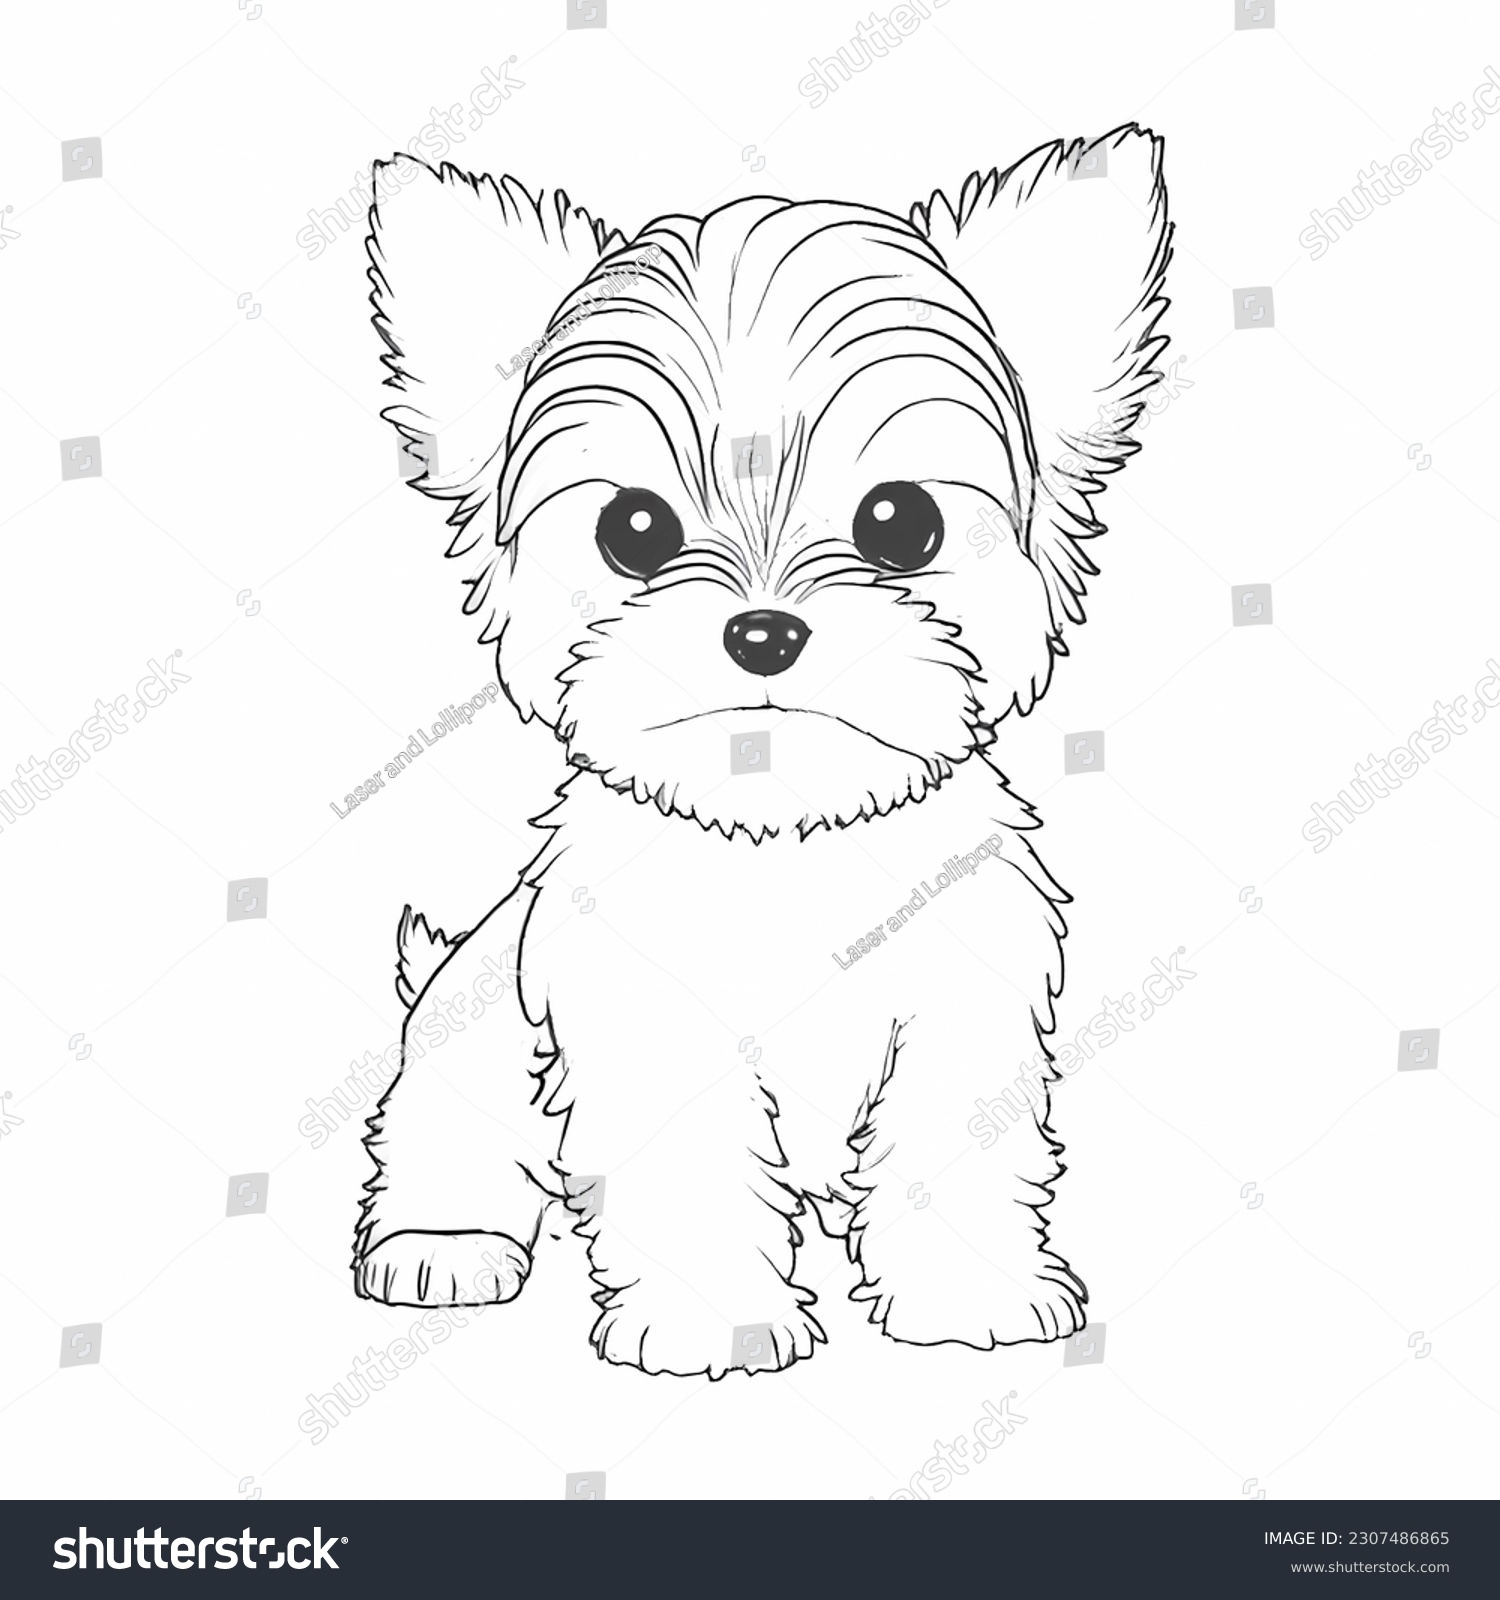 Cute dog coloring pages kids stock illustration